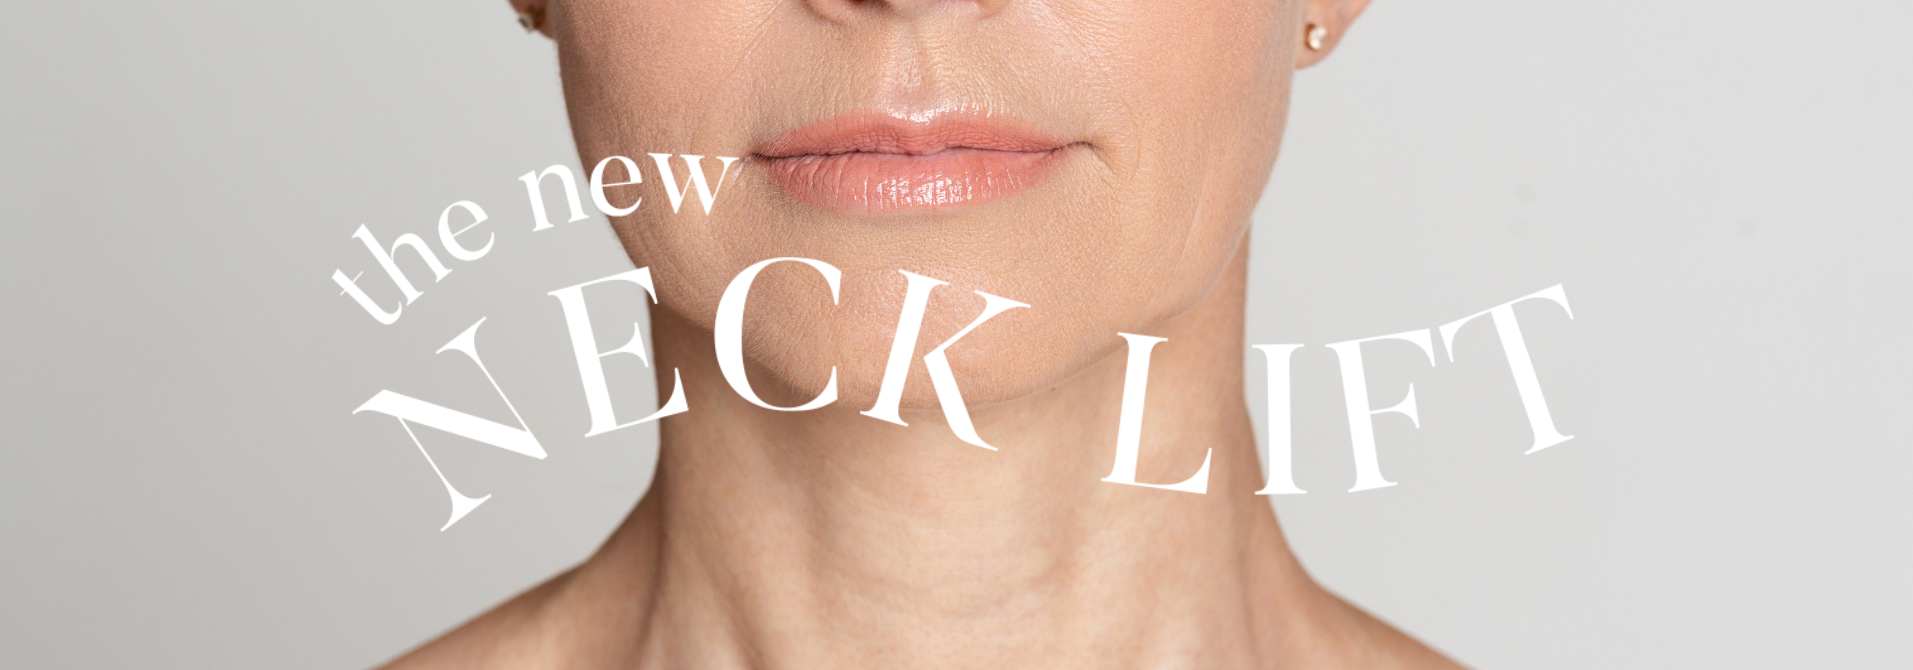 The New Necklift: Evening Event with Dr. Shaw